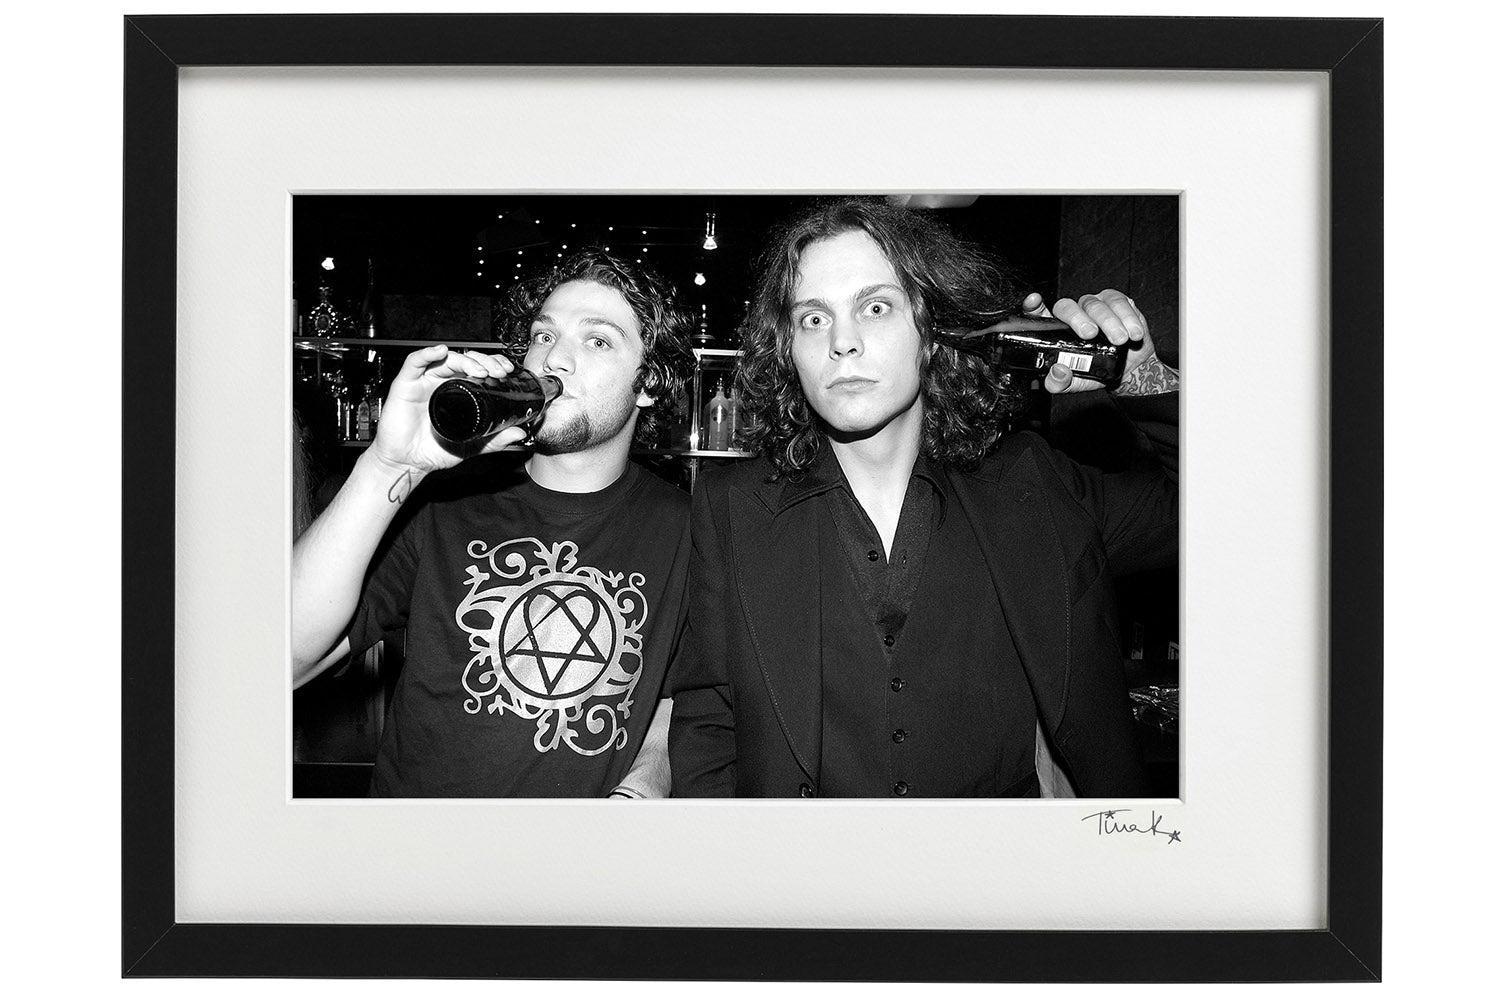 Framed Print of Ville Valo of Finnish rock band HIM with Bam Margera of Jackass at the Kerrang Awards, 2003 , taken by Tina K